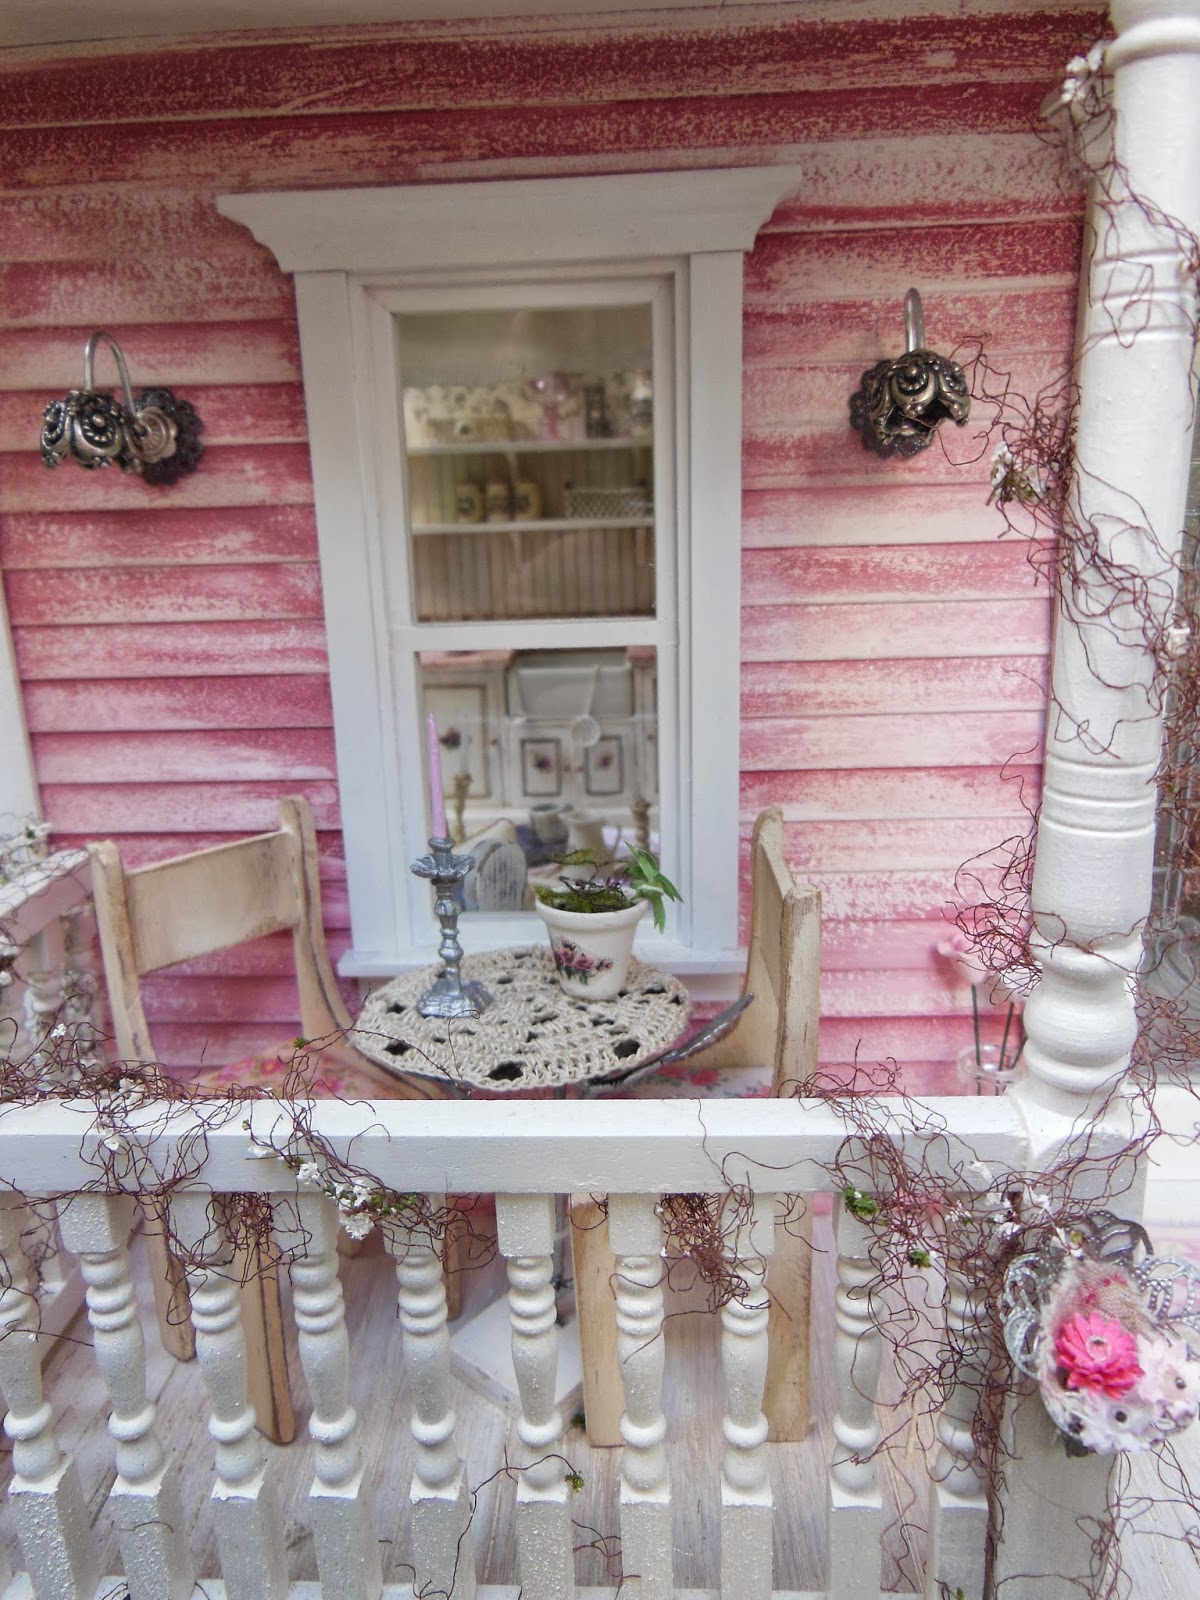 Shabby Chic Furniture And Accessories: How To Create A Cozy Cottage Look